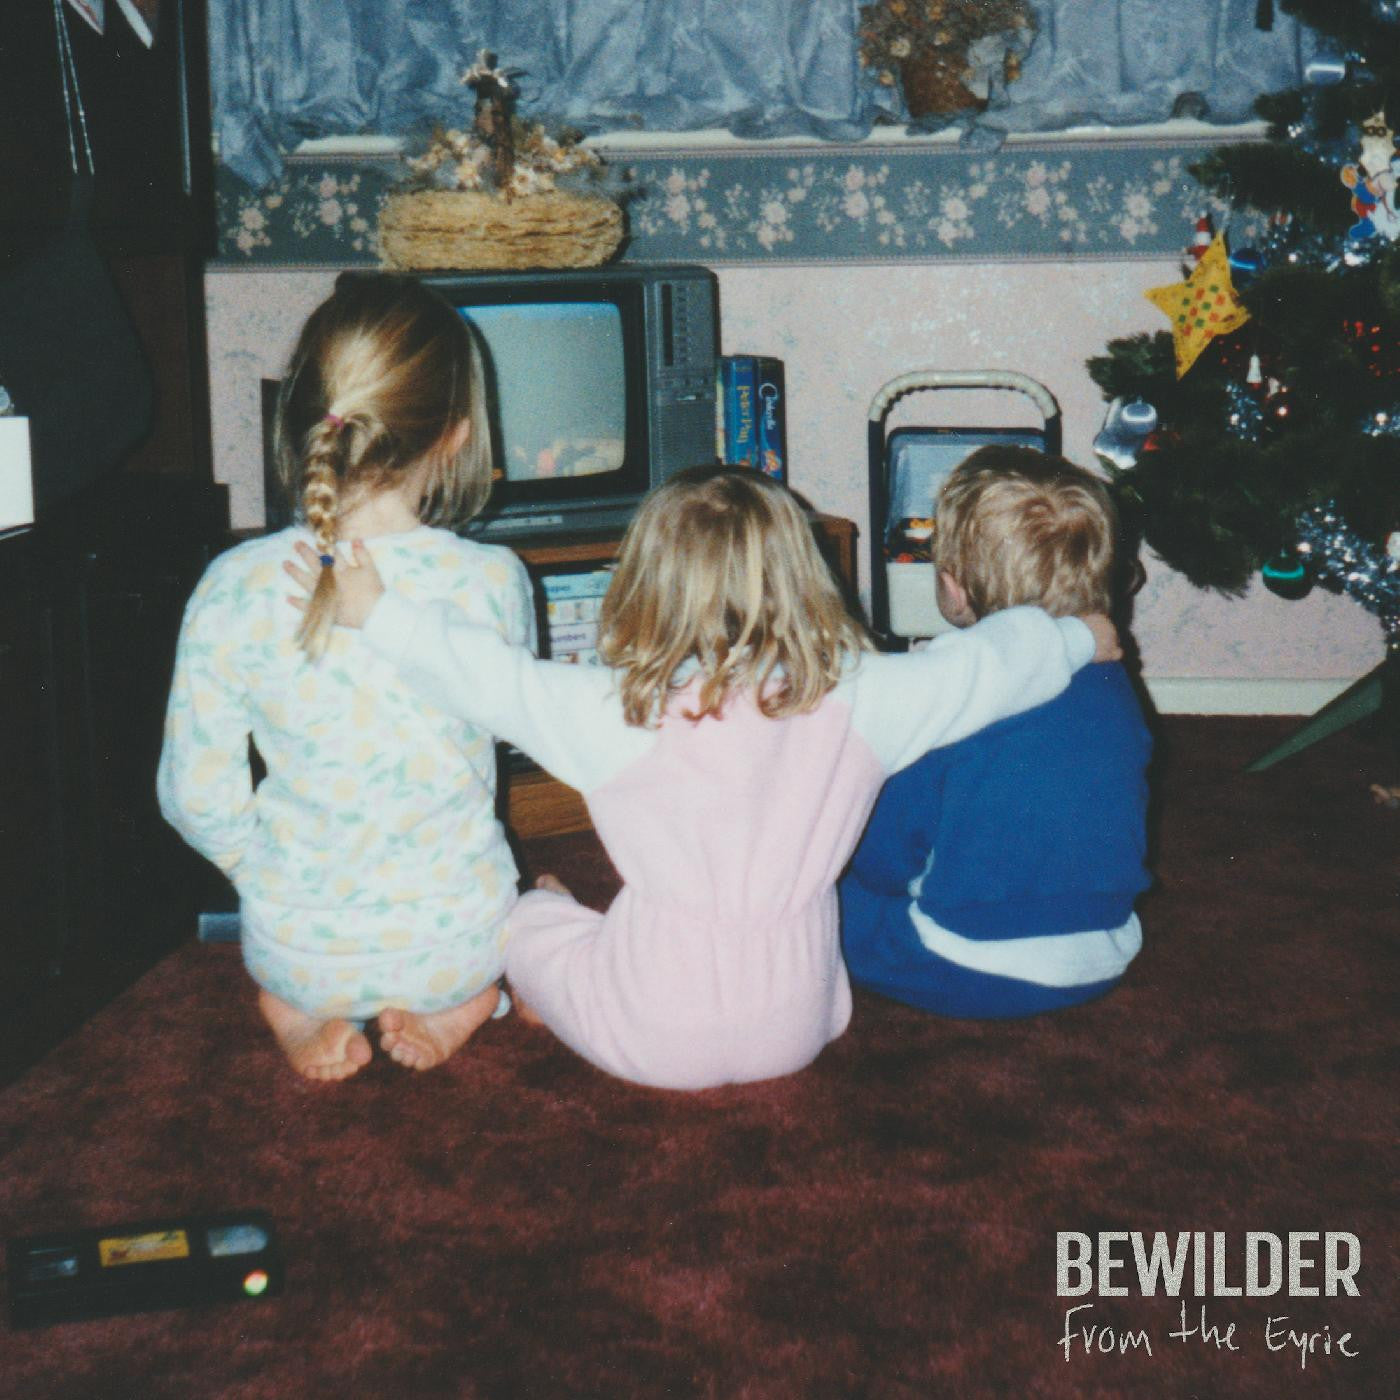 [DAMAGED] Bewilder - From The Eyrie [Maroon Vinyl]